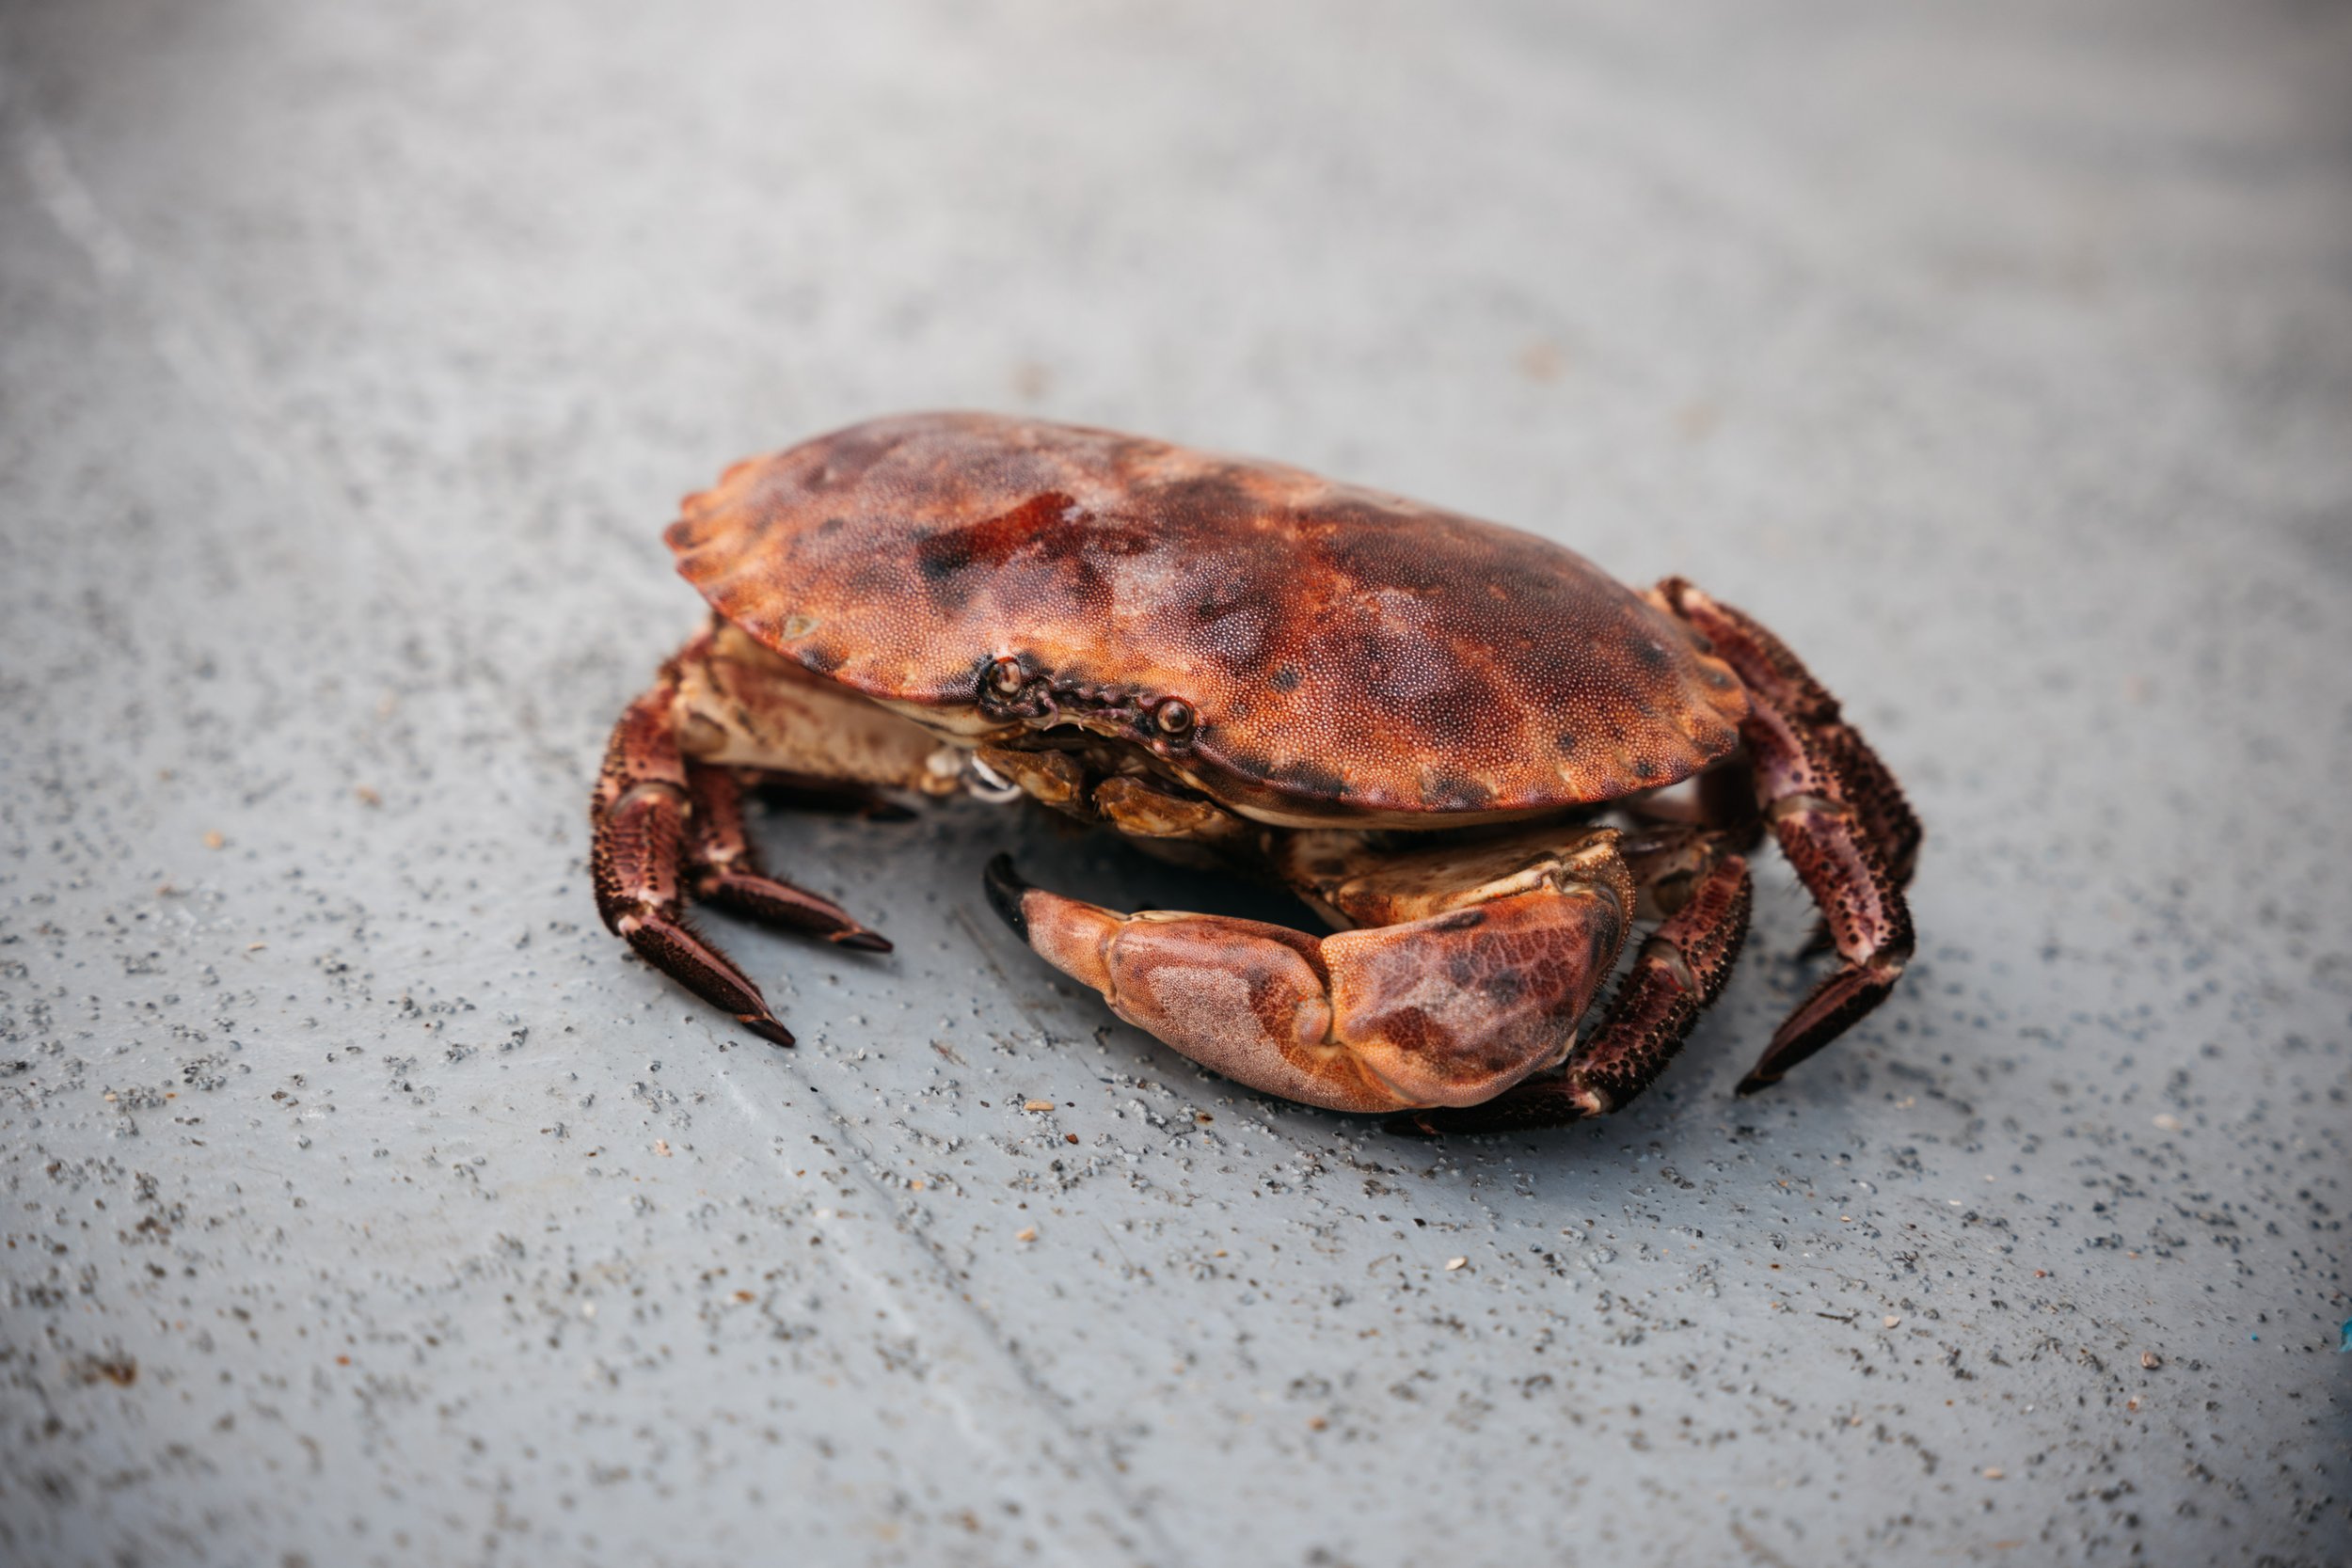  The much sought-after Cornish Crab 